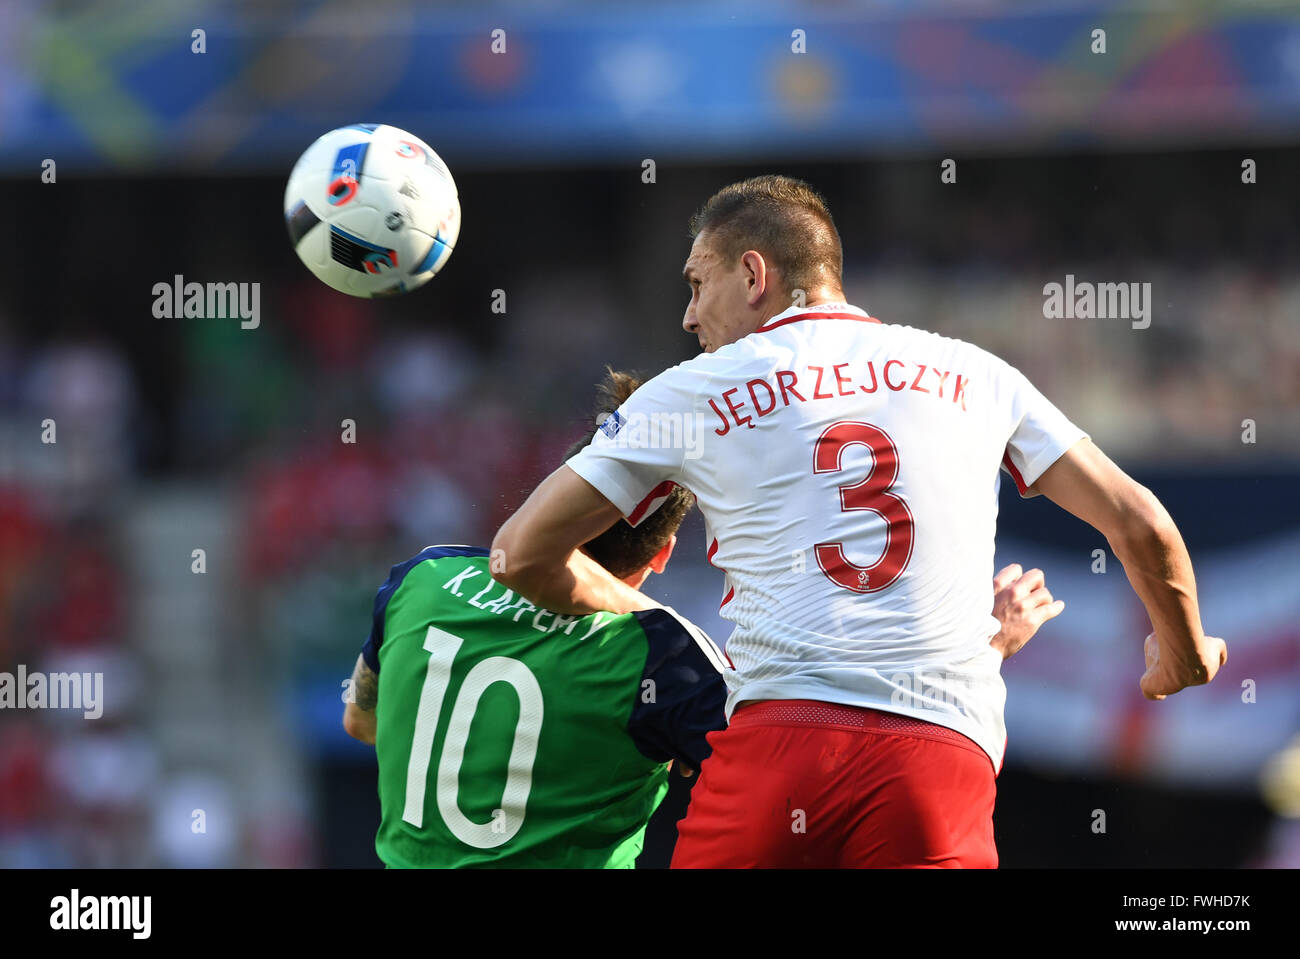 Artur Jedrzejczyk (R) of Poland and Kyle Lafferty of Northern Ireland challenge for the ball during the UEFA Euro 2016 Group C soccer match between Poland and Northern Ireland in Nice, France, June 12, 2016. Photo: Federico Gambarini/dpa Stock Photo